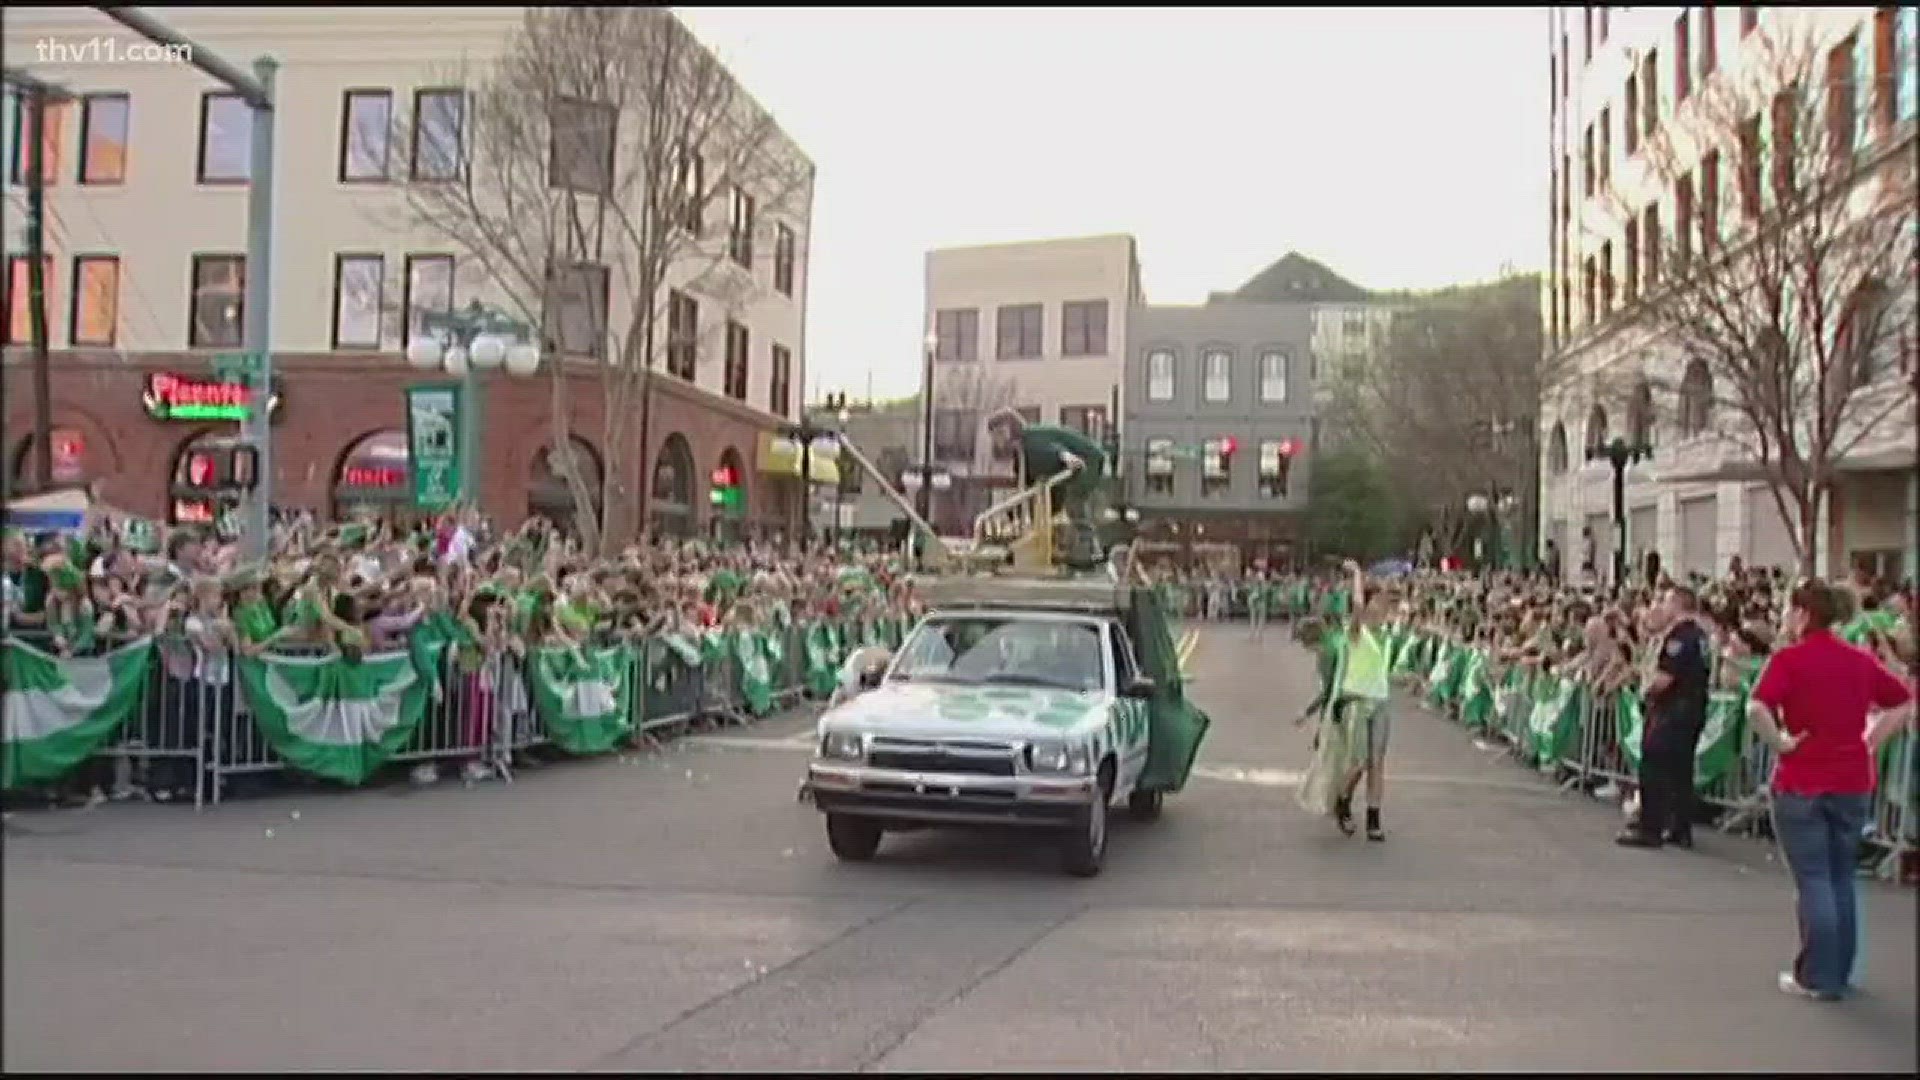 The World's Shortest St. Patrick's Day Parade in Hot Springs announce that Mountain Pine's marching band would be the parade's first this year.